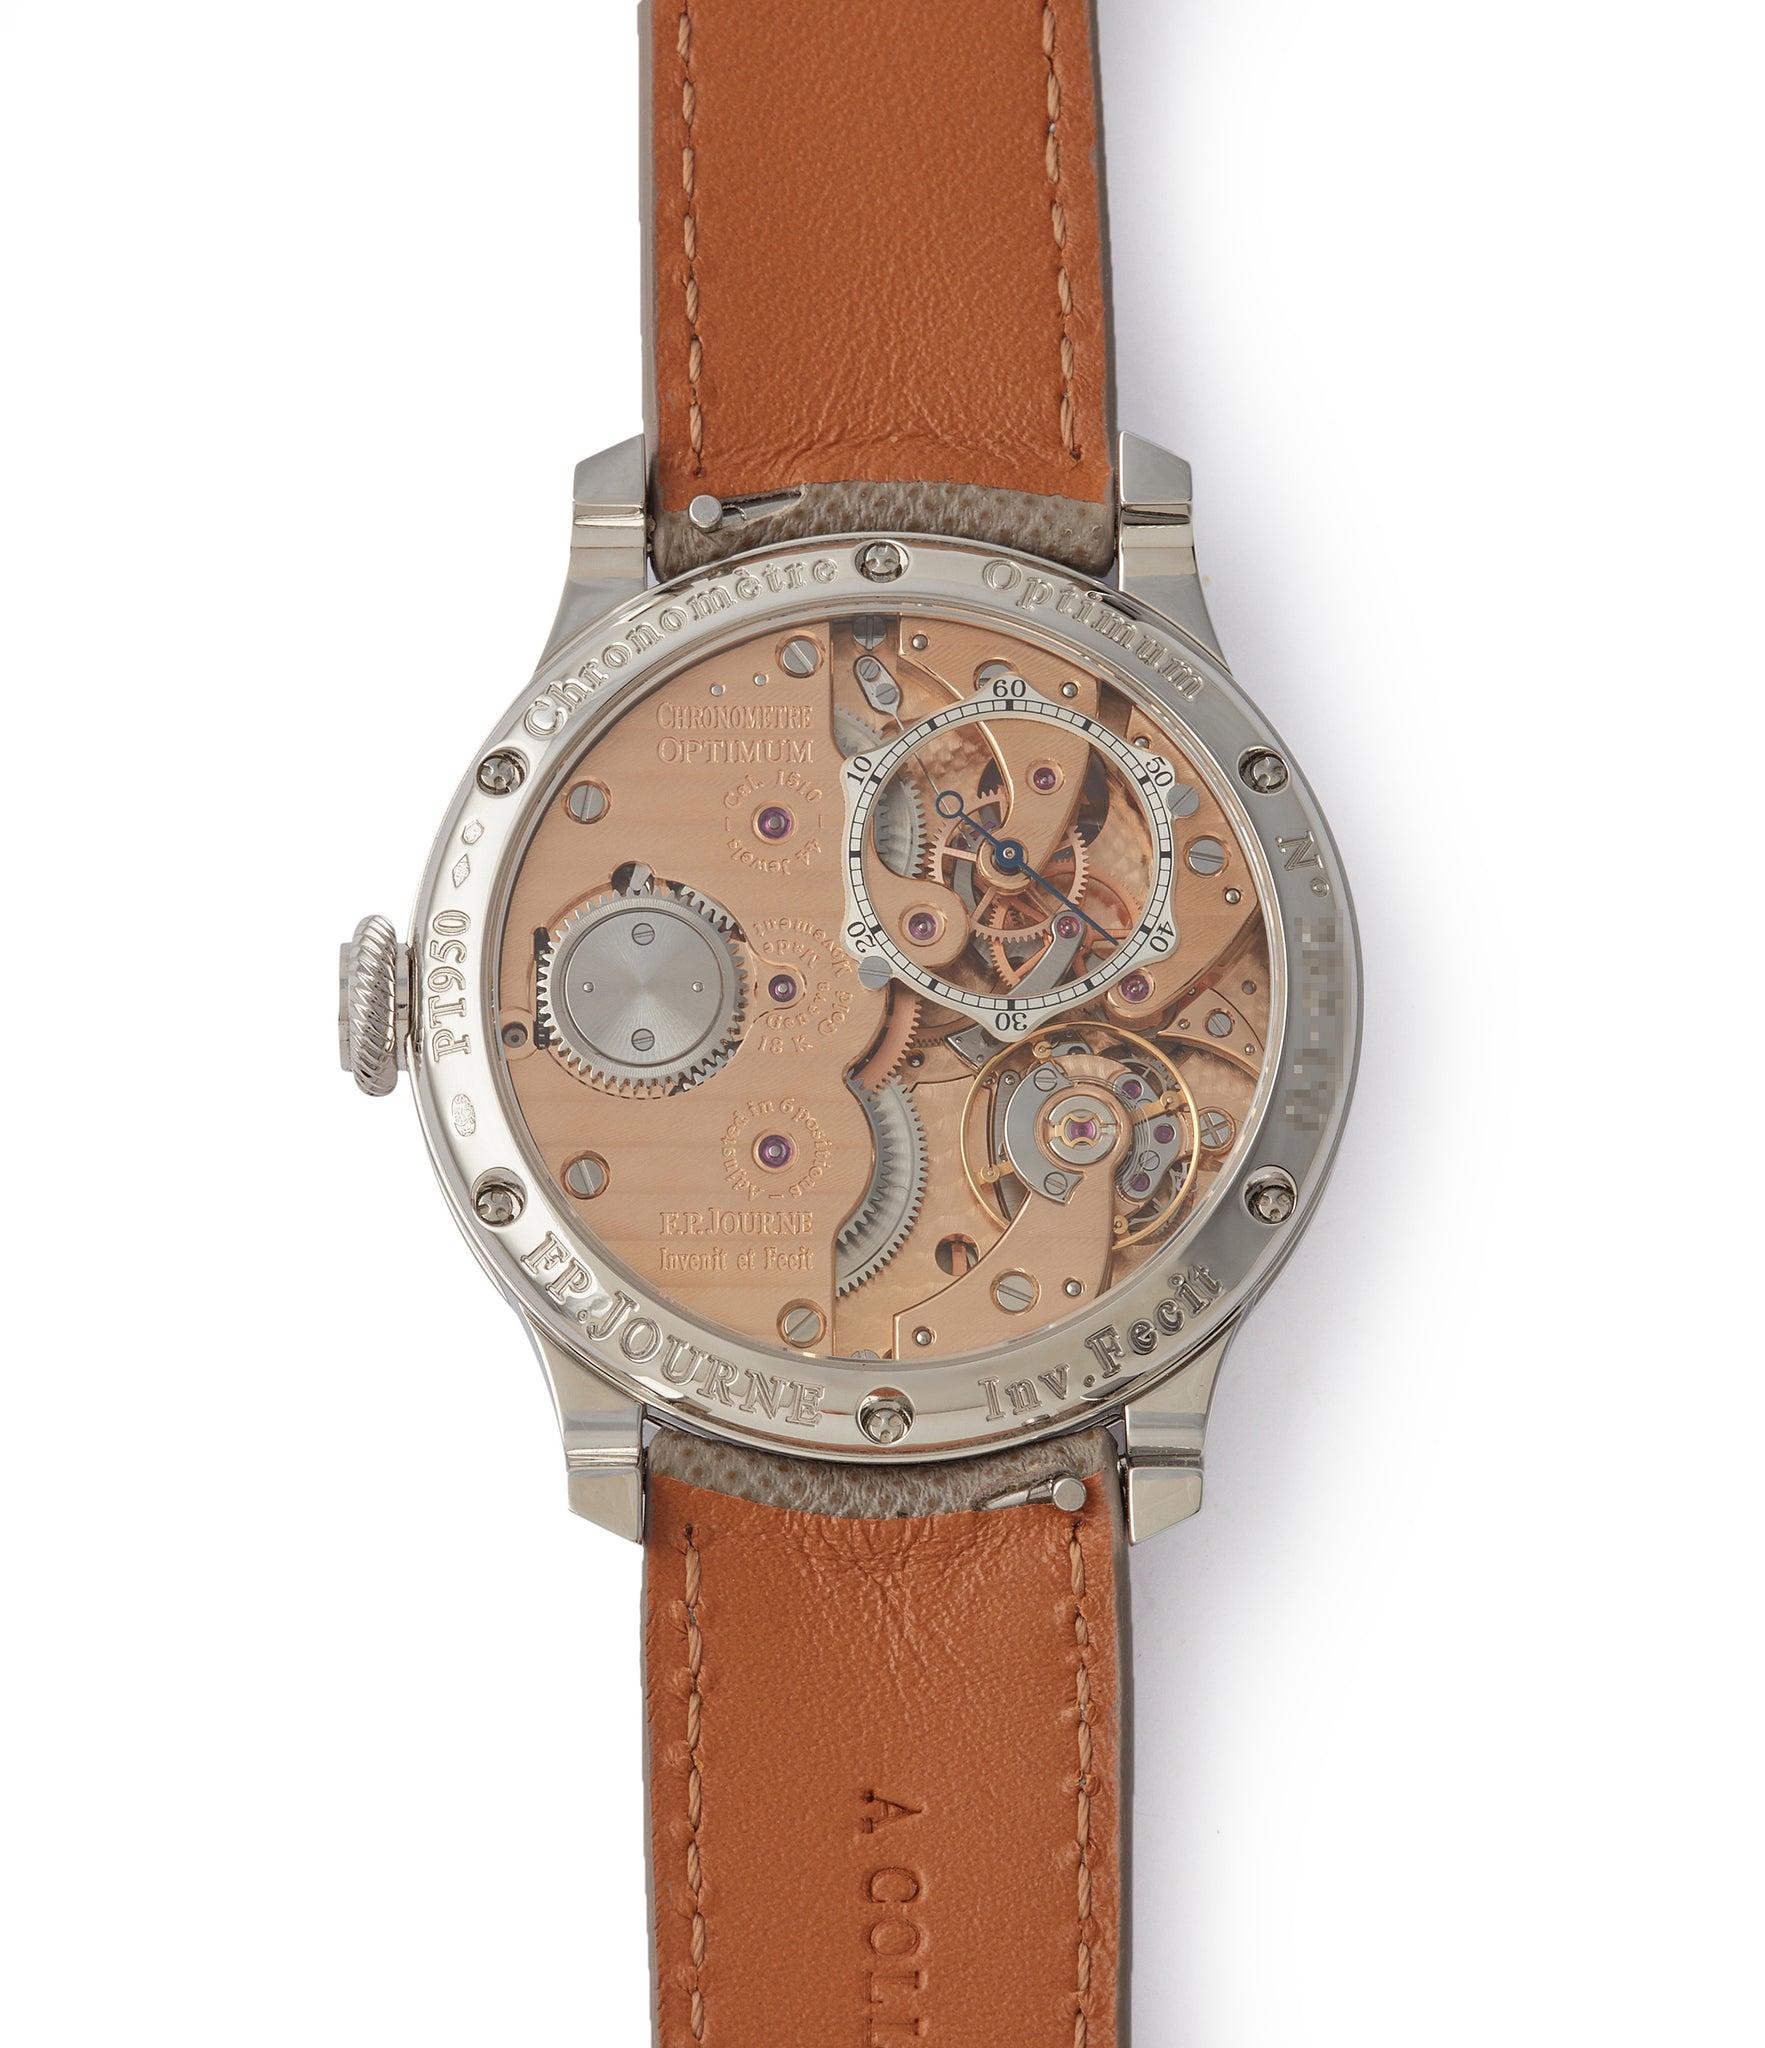 Cal. 1510 manual-winding Journe Chronometre Optimum 40mm platinum pre-owned dress watch for sale at A Collected Man London selling independent watchmakers